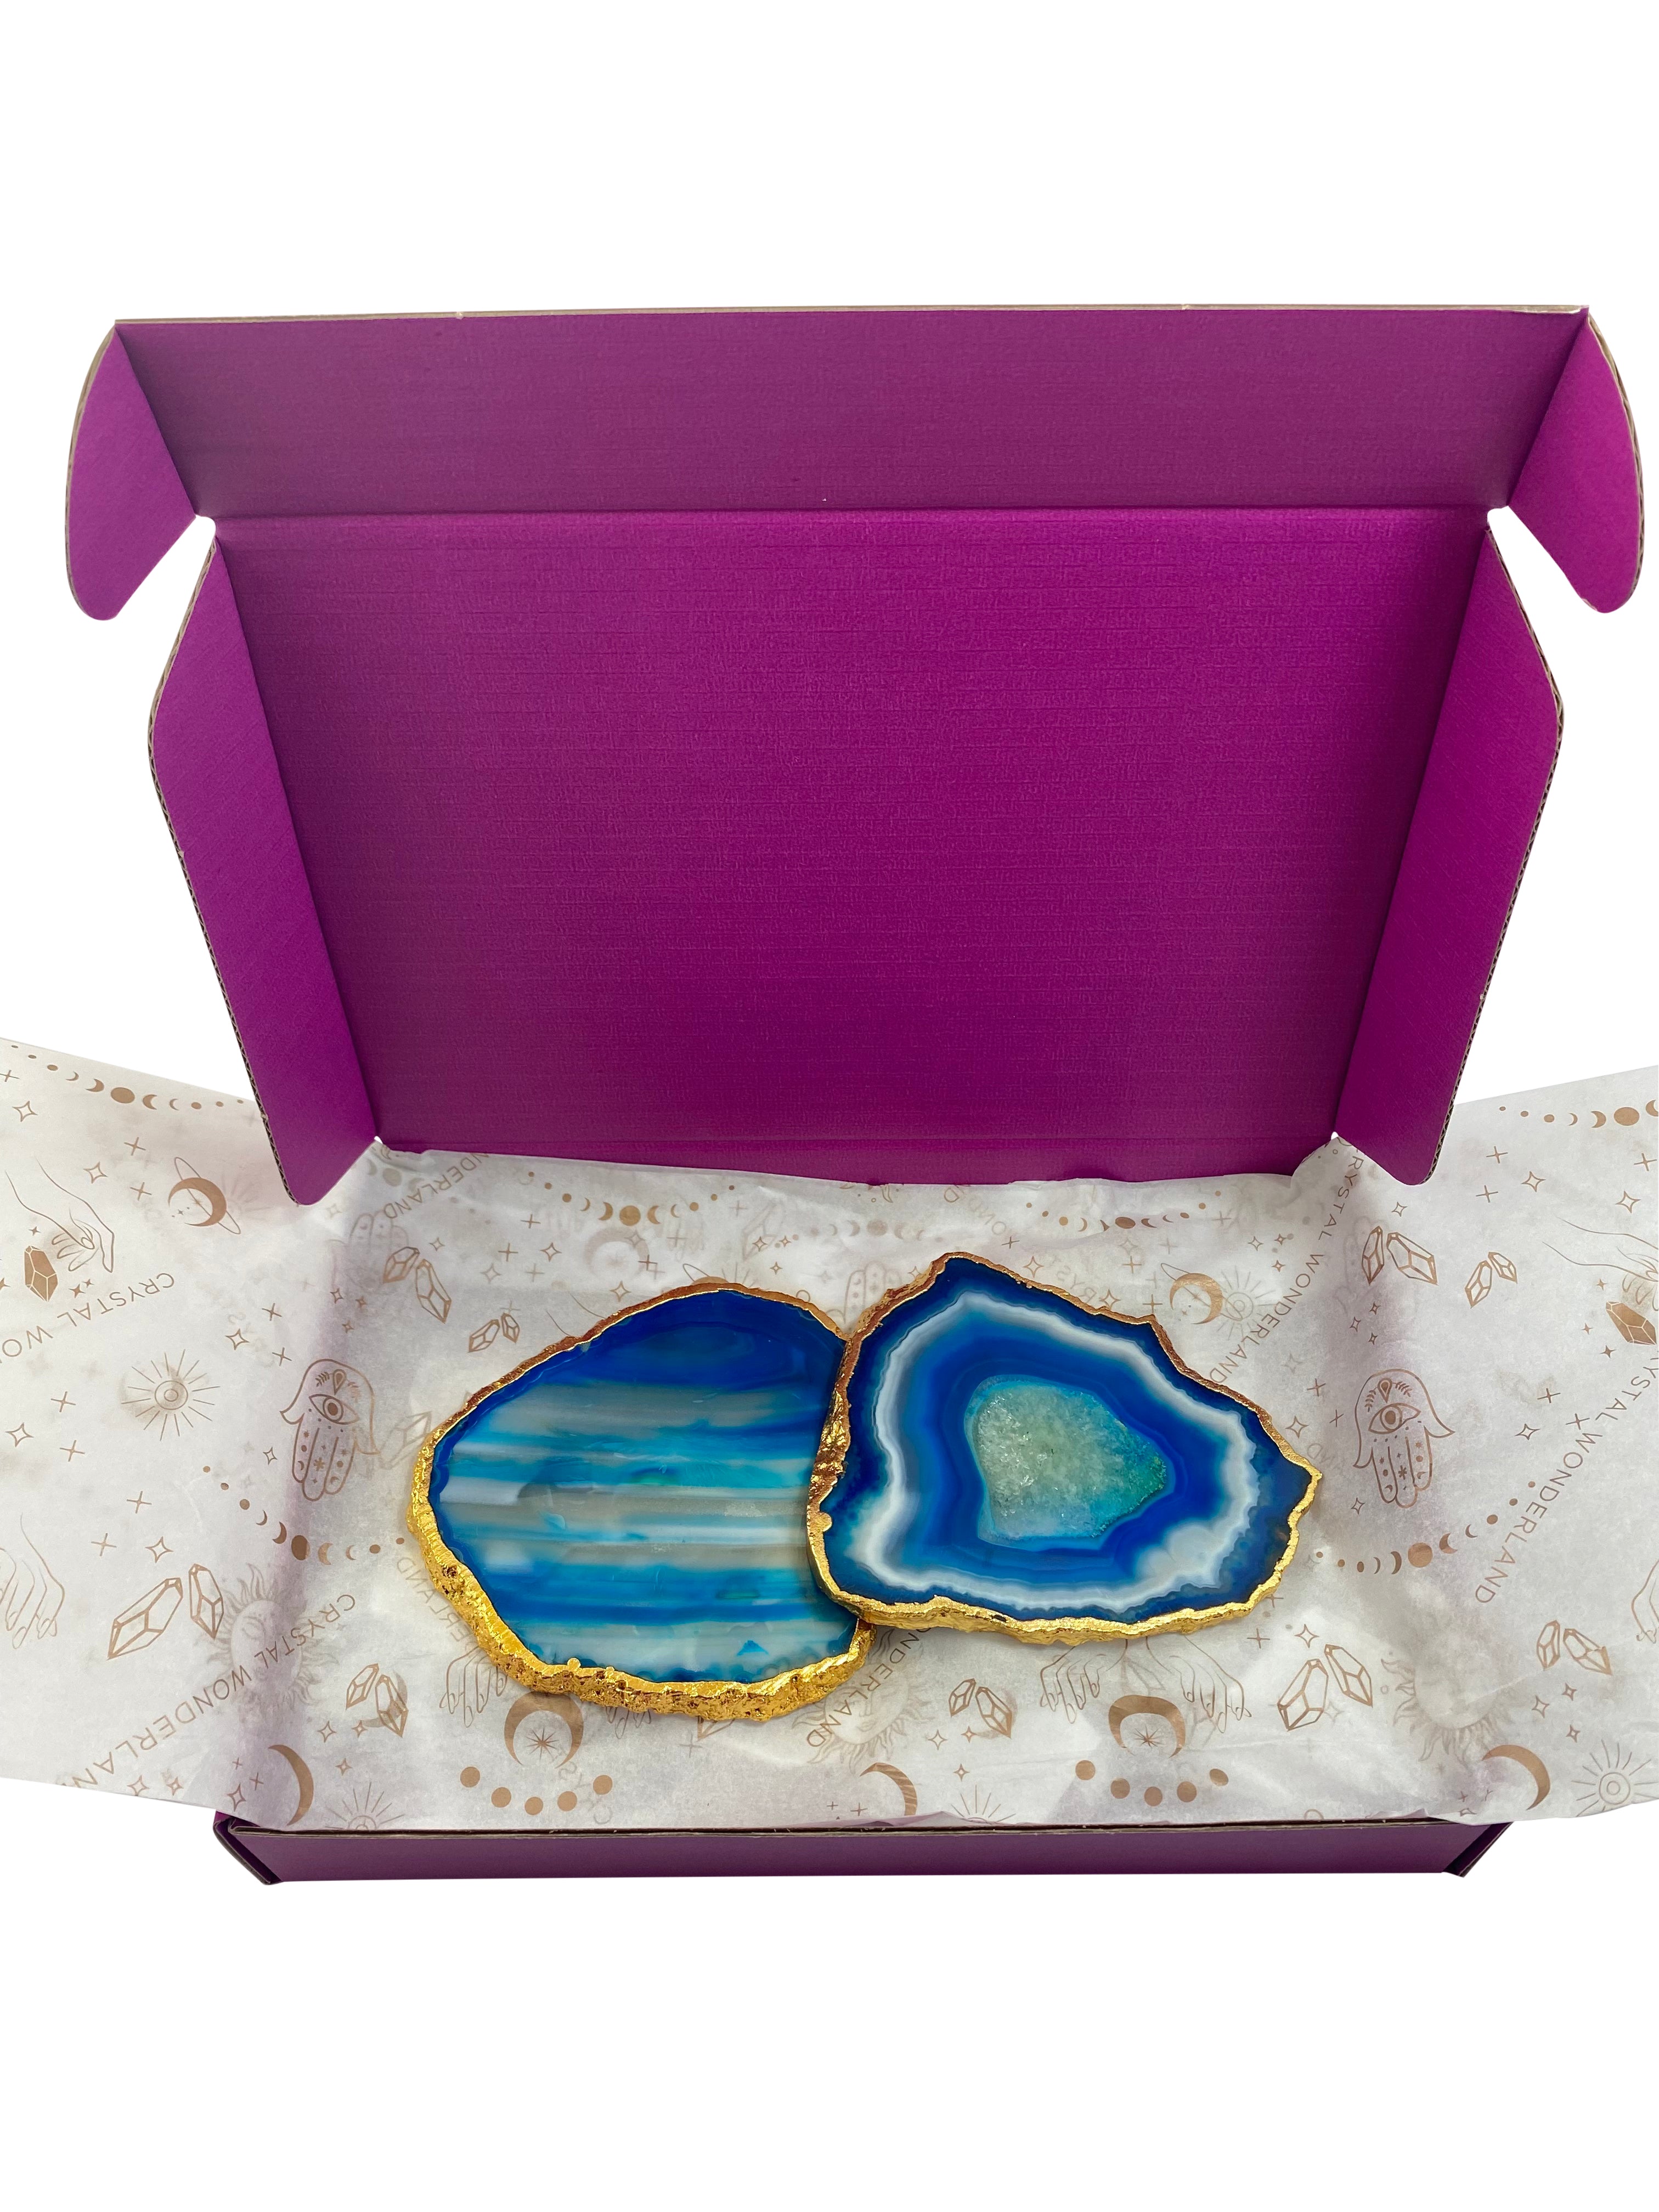 Blue Dyed Agate Coaster Natural Shape Gold - 4 Pieces